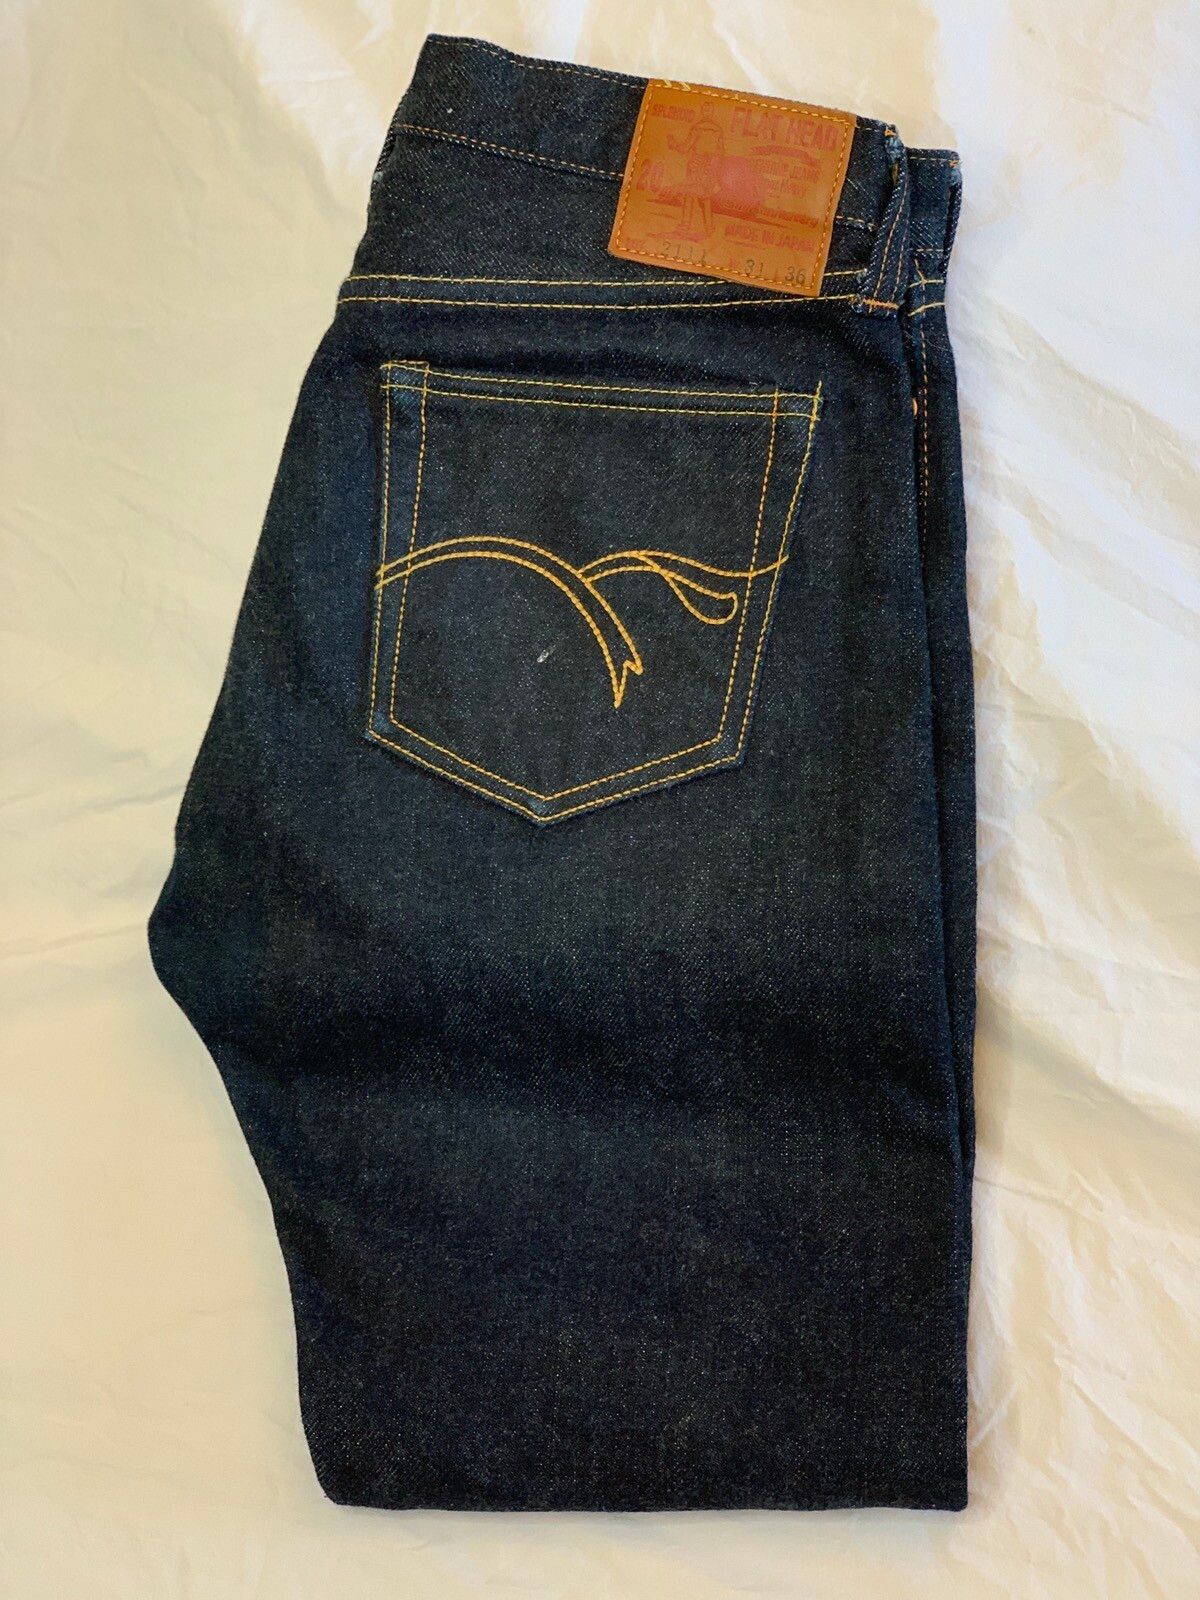 The Flat Head 2111 20 oz super heavy 15th anniversary jeans Size US 31 - 1 Preview